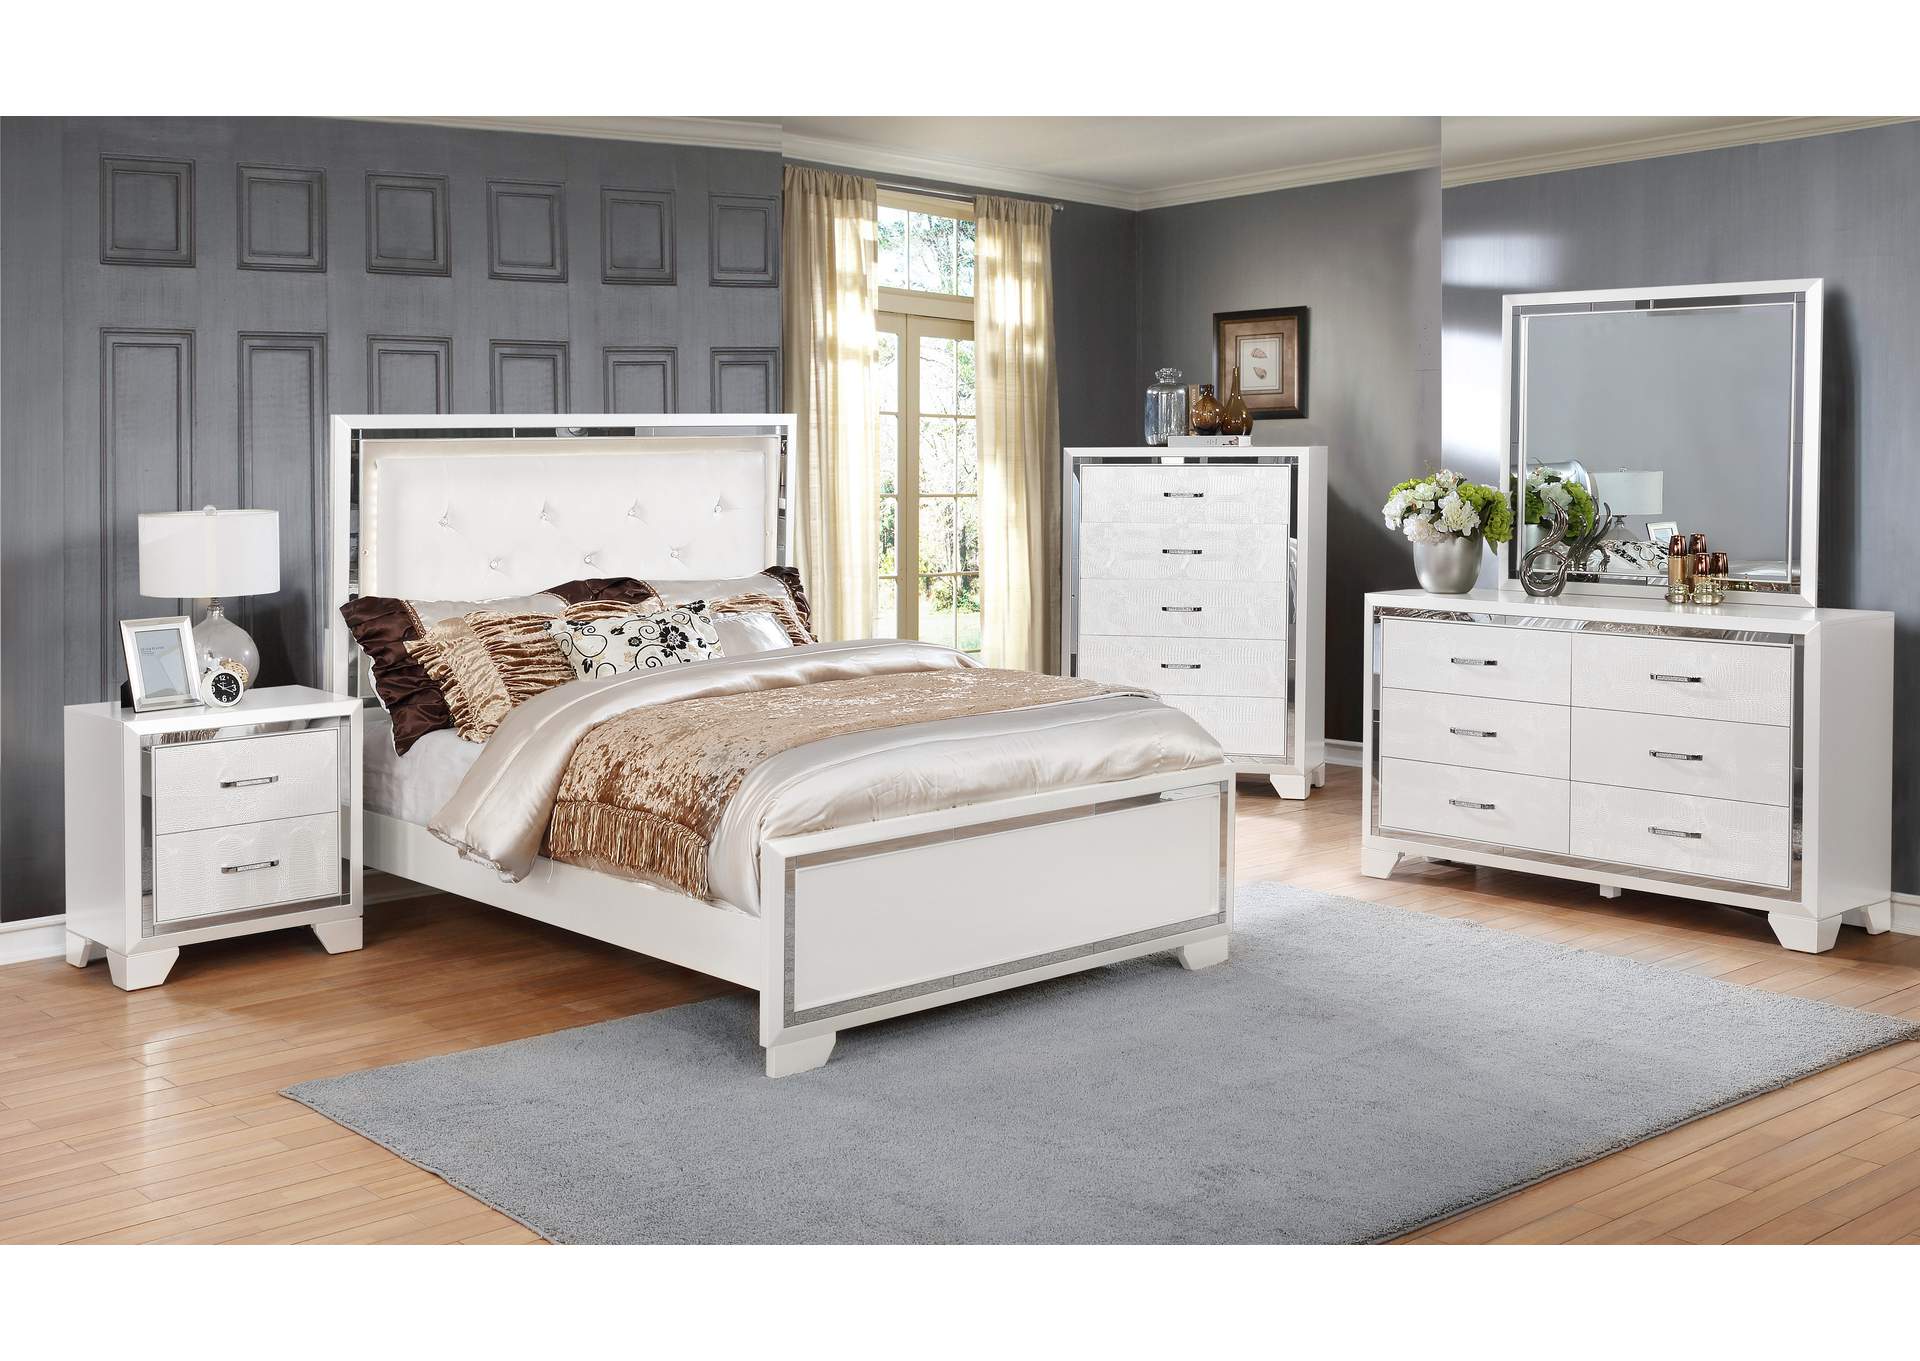 B591 4 Piece White Queen Bedroom Set Q - D - M - N,Global Trading